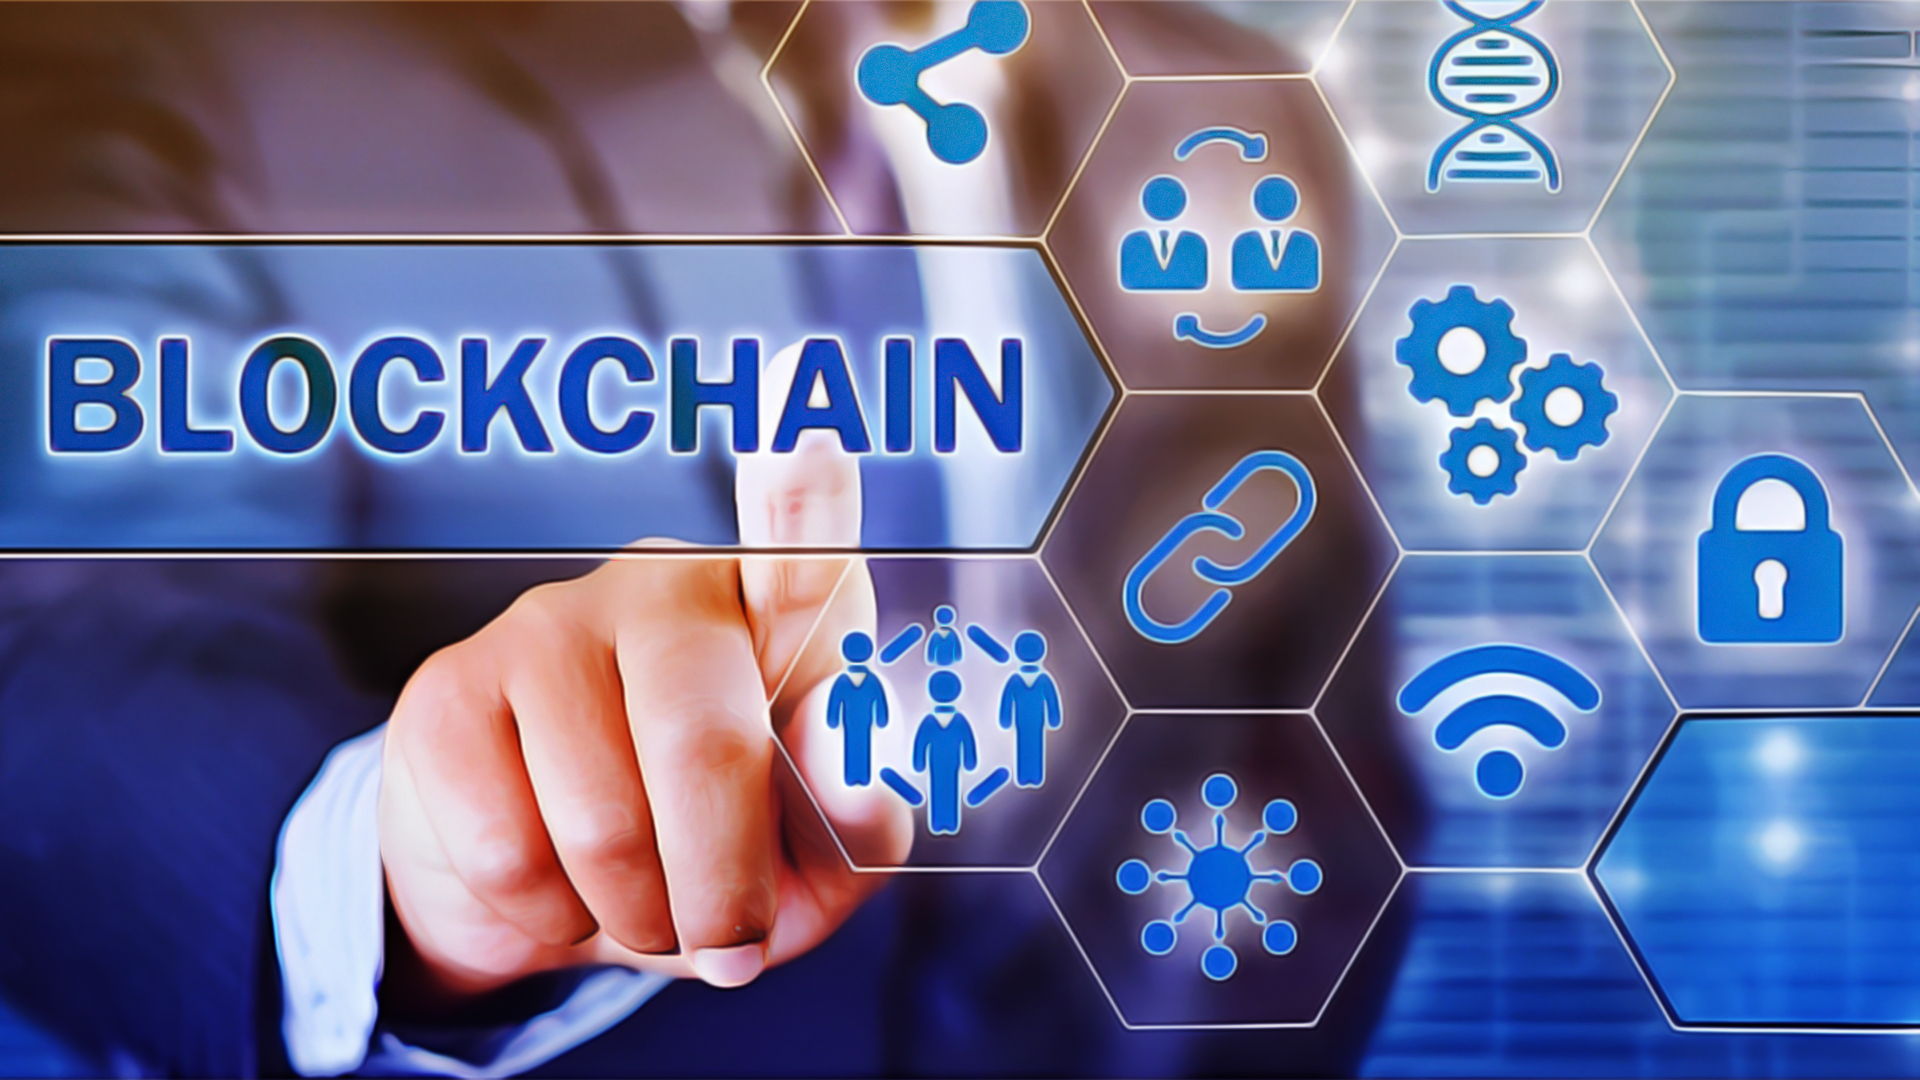 Will Blockchain Technology Replace Traditional Business Models?